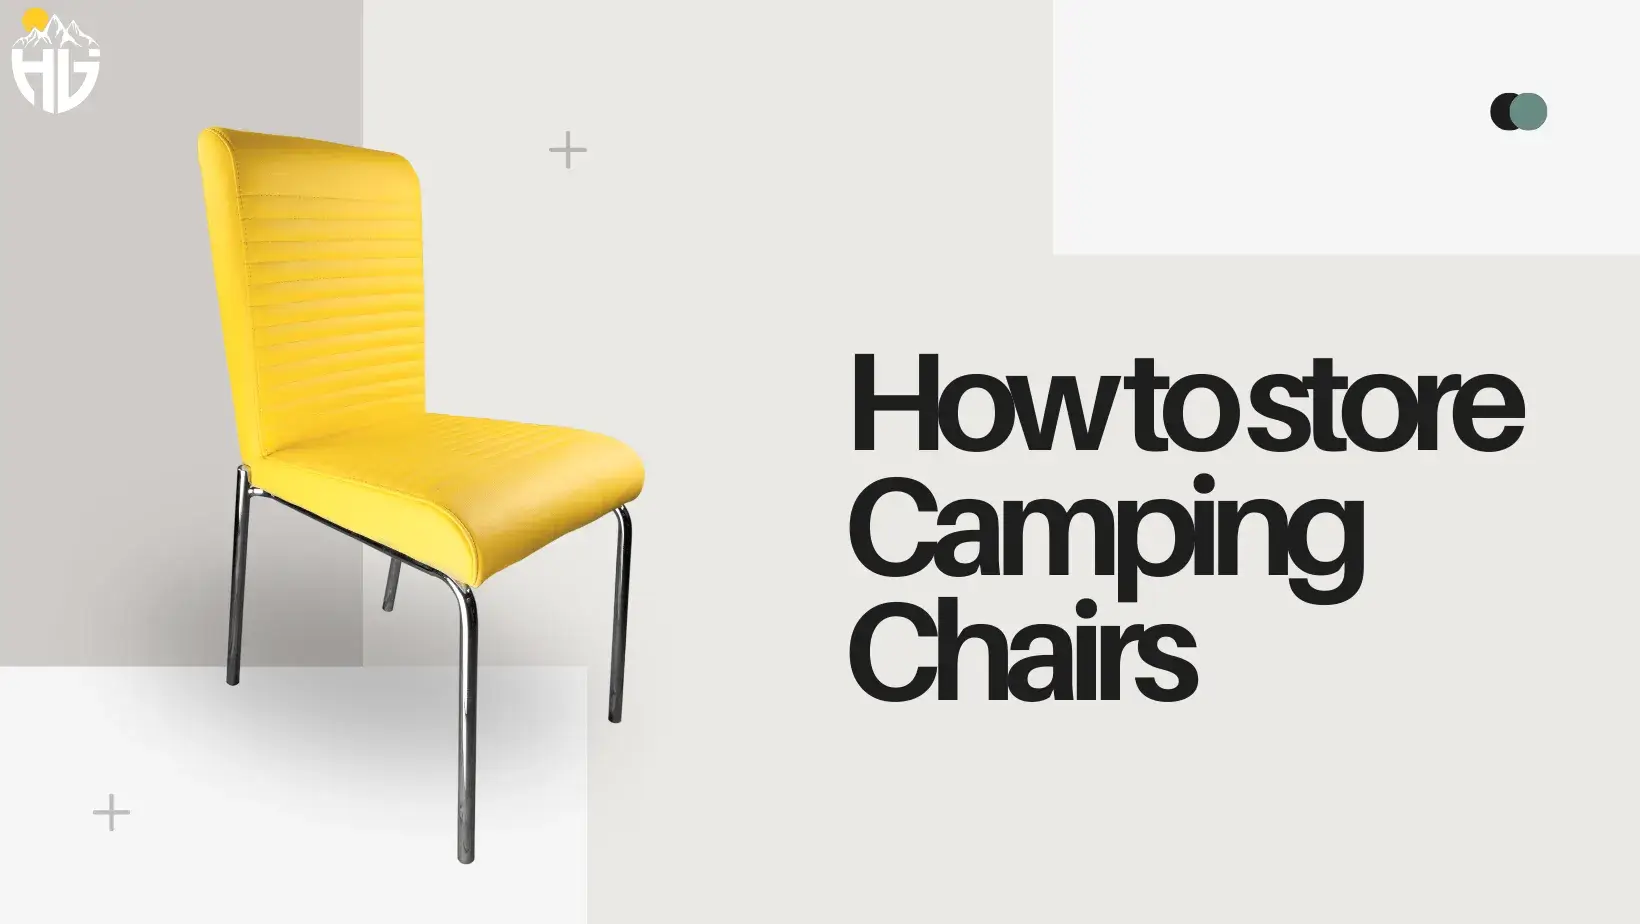 How to store Camping Chairs